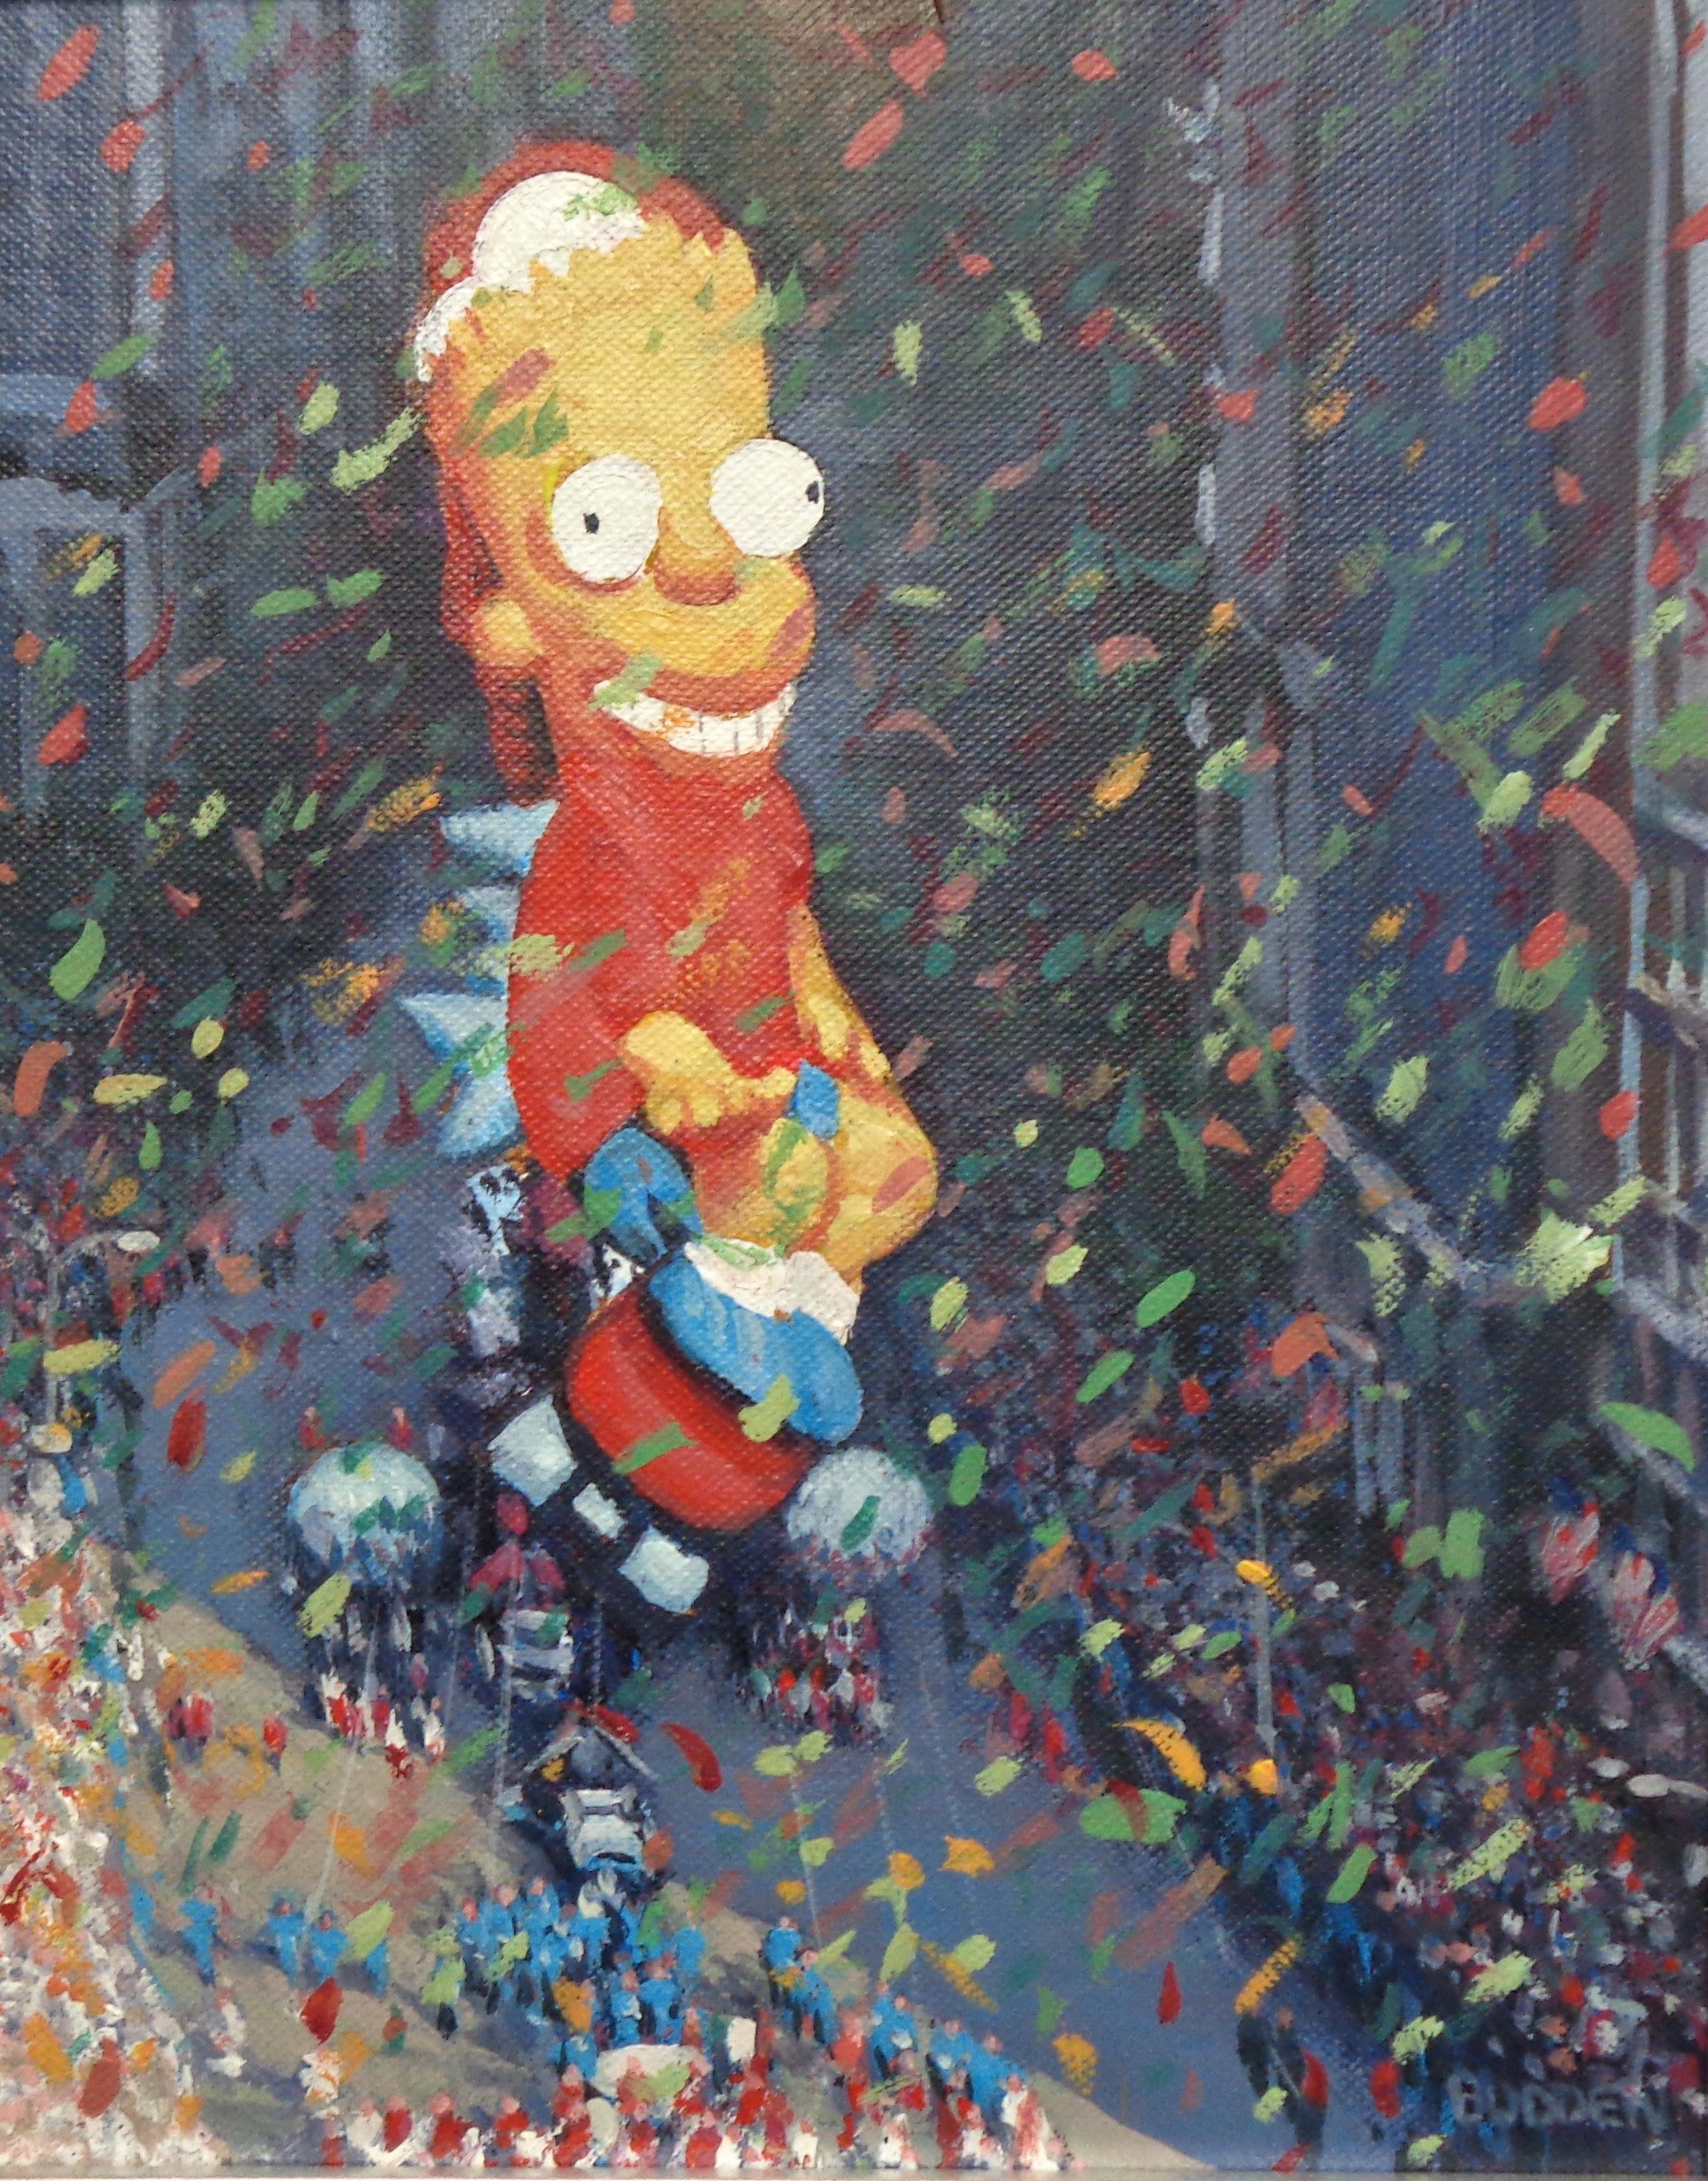   NYC Landscape Oil Painting Michael Budden Macy's Parade Series Bart Simpson 1